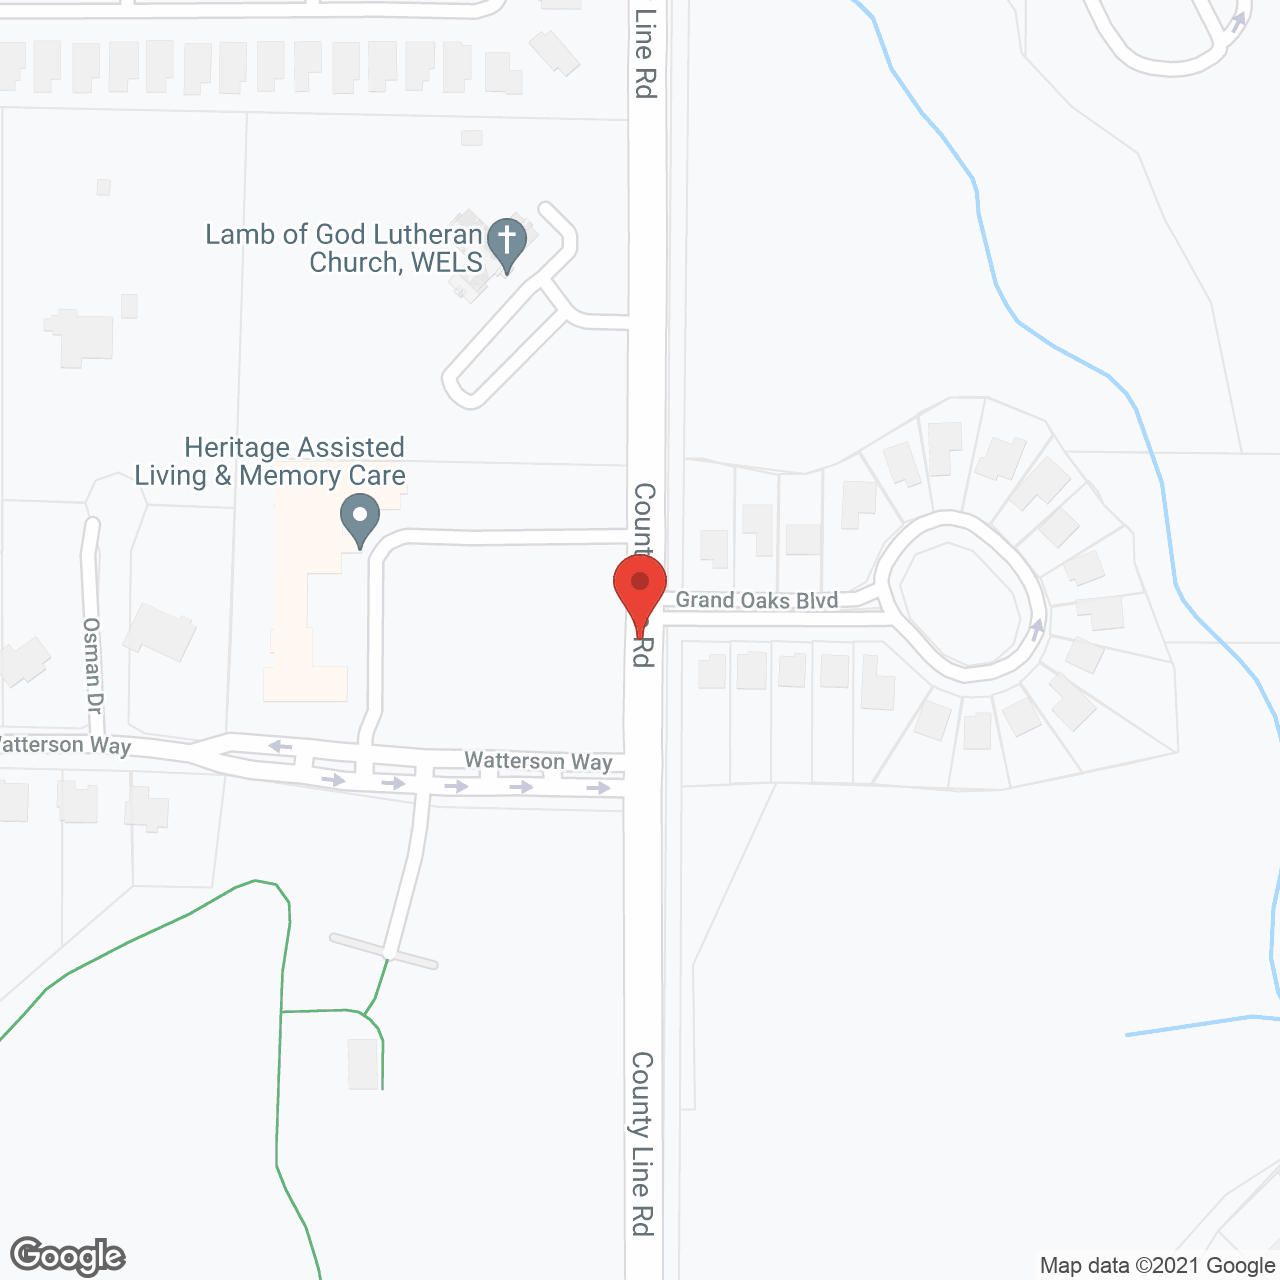 Heritage Assisted Living and Memory Care in google map